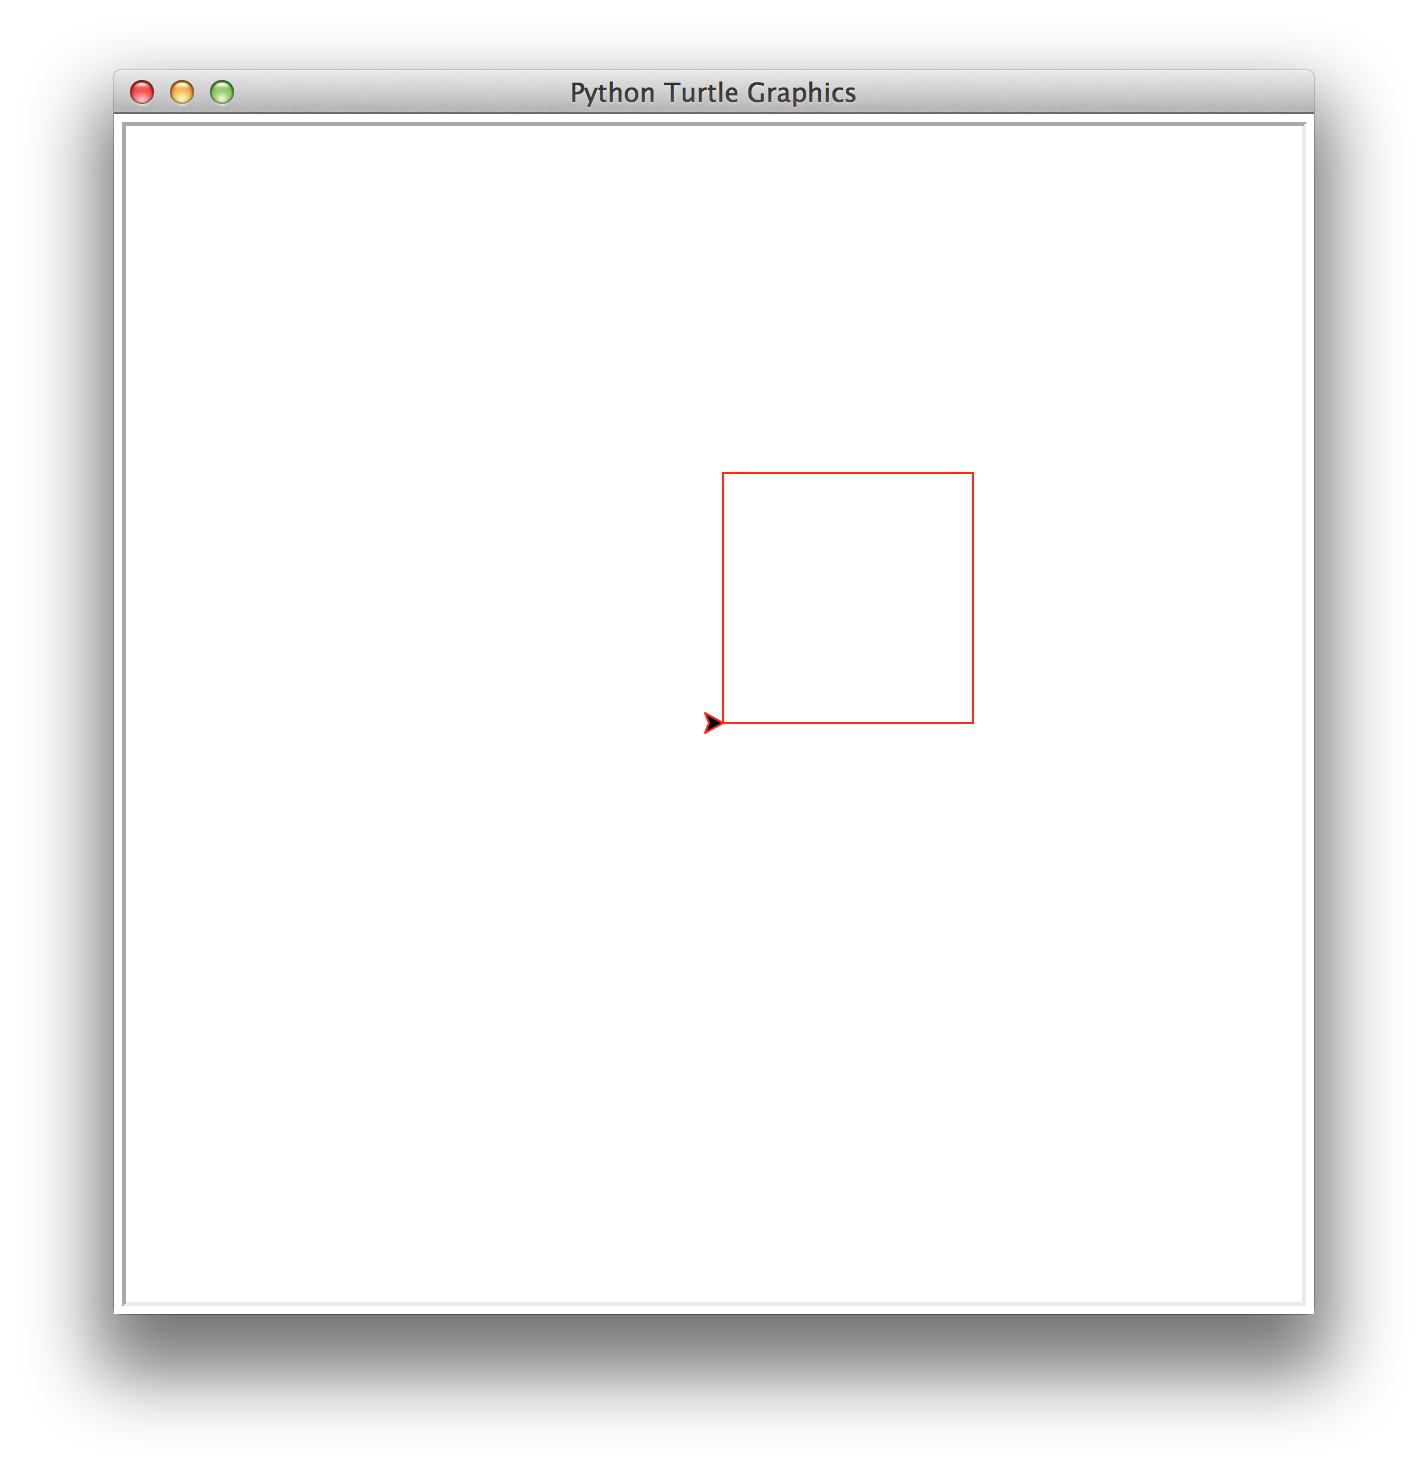 A single square. This image actually shows the whole turtle window, and you can see that the turtle is at the center of the window facing right (the default turtle starting position) while the square stretches up and to the right from there.